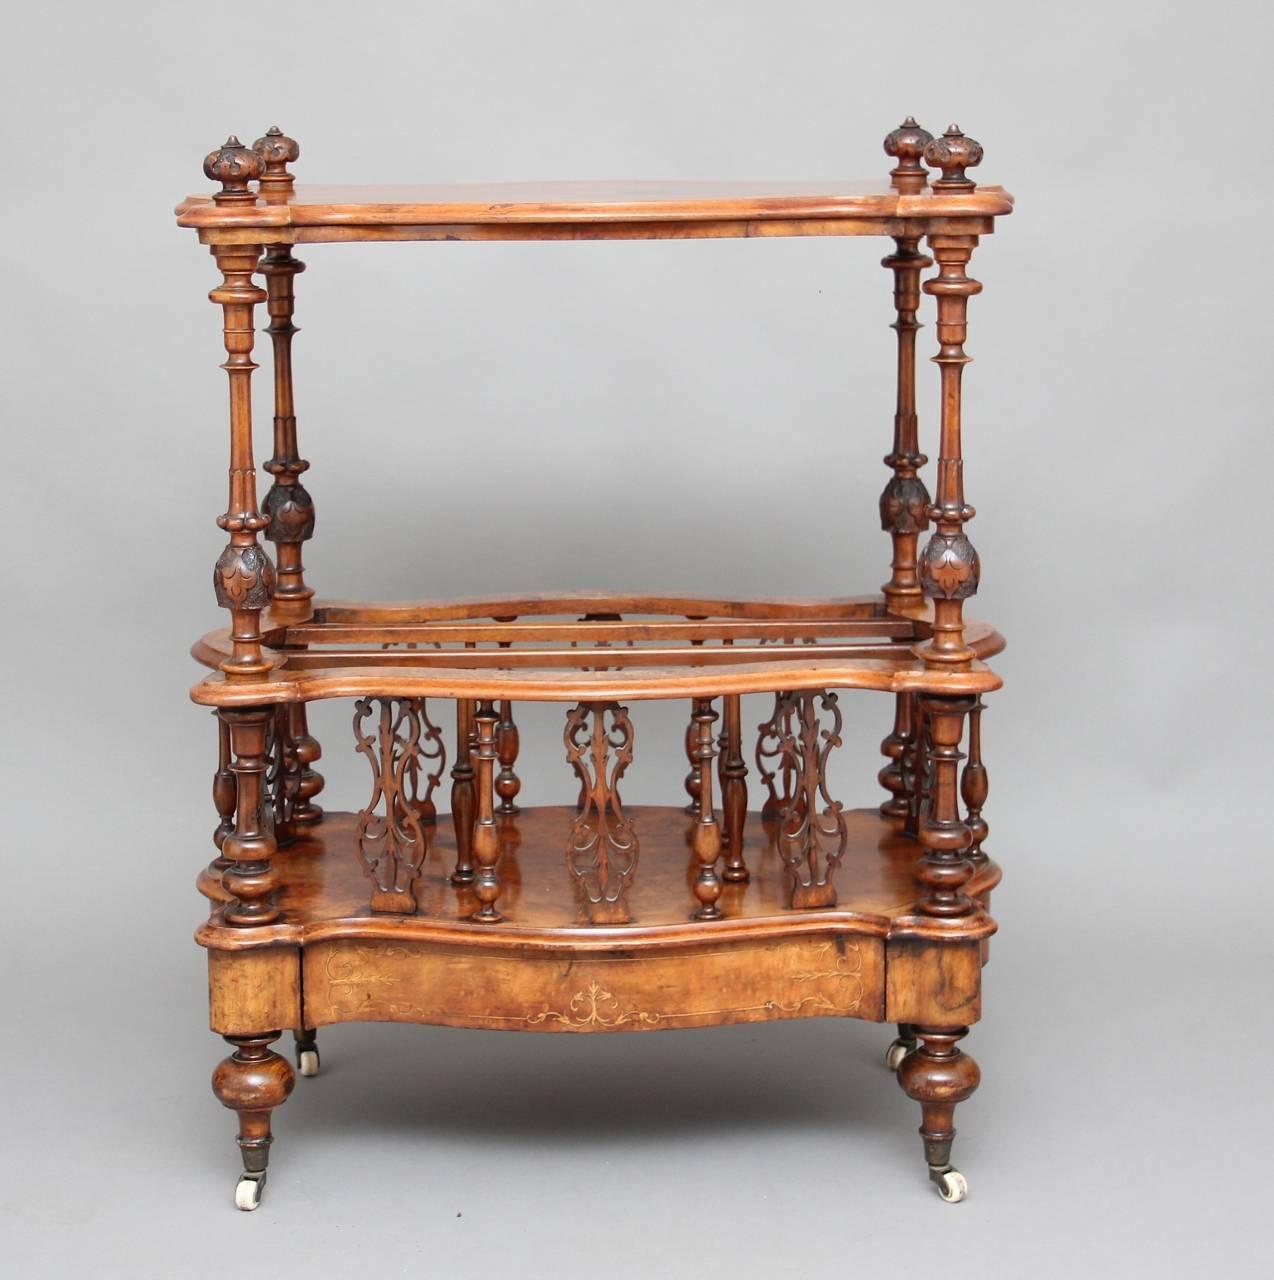 19th century serpentine shaped burr walnut Canterbury, the shaped top decorated with fine inlay and having carved finials in each corner, supported on four carved and turned columns, the middle section having three divisions which is divided by